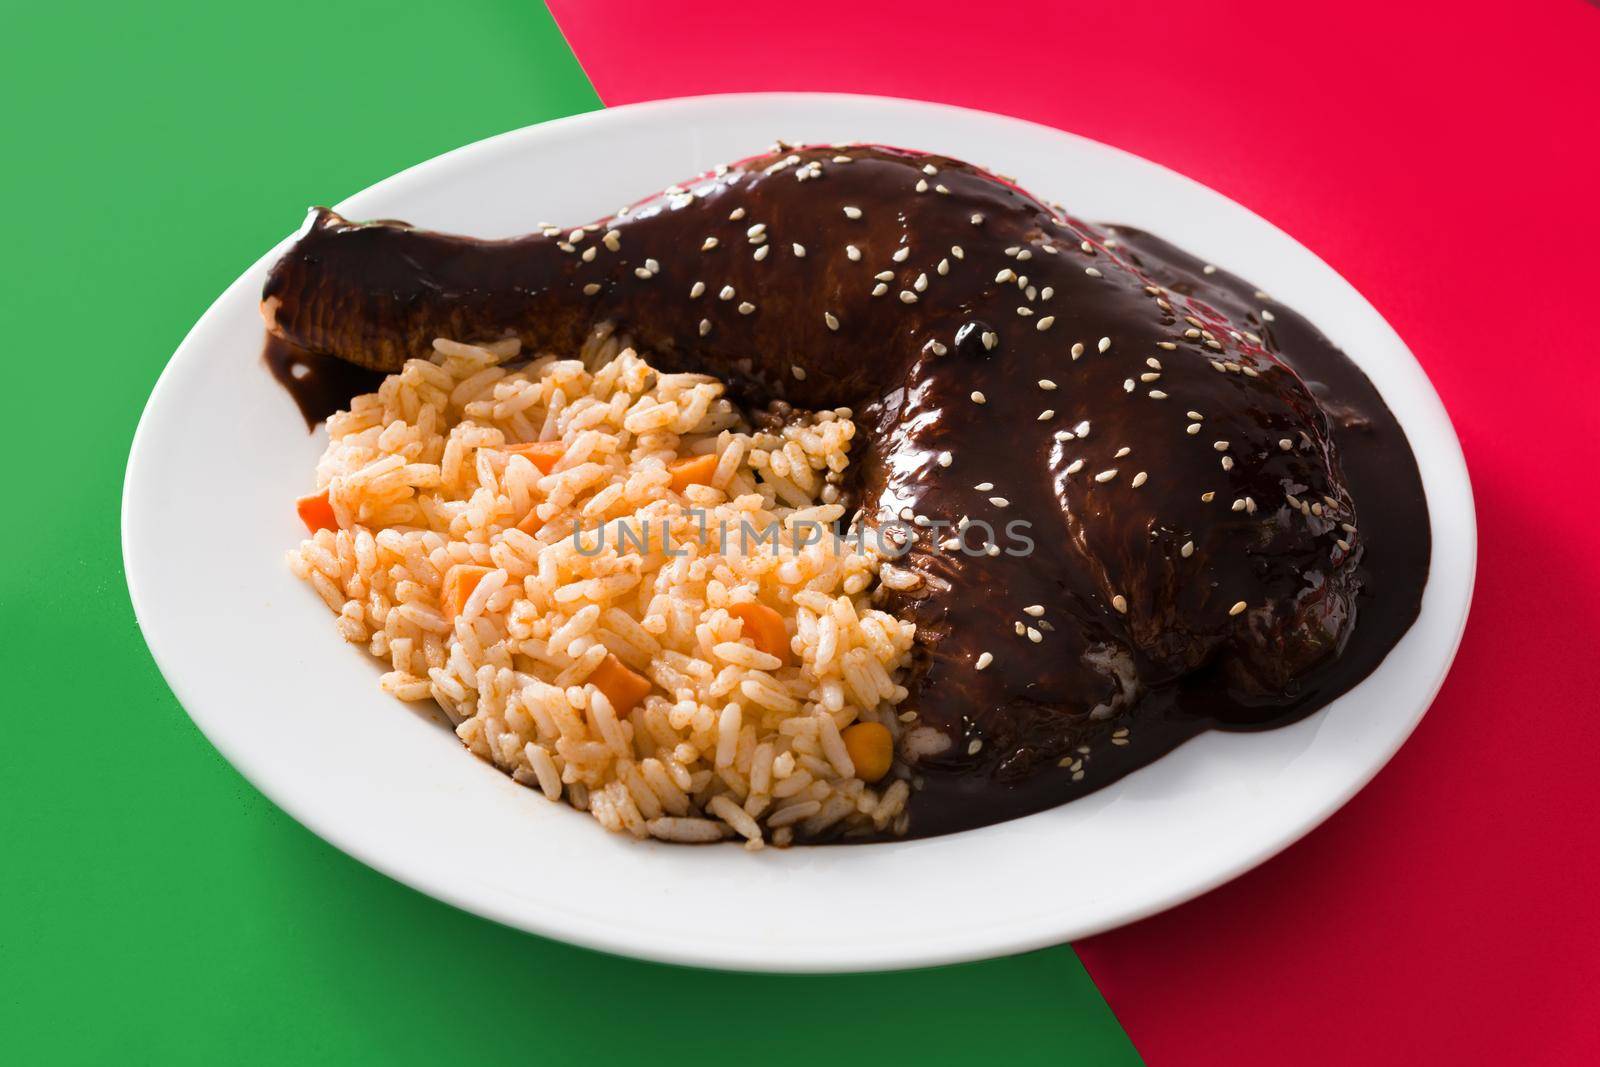 Traditional mole Poblano with rice by chandlervid85